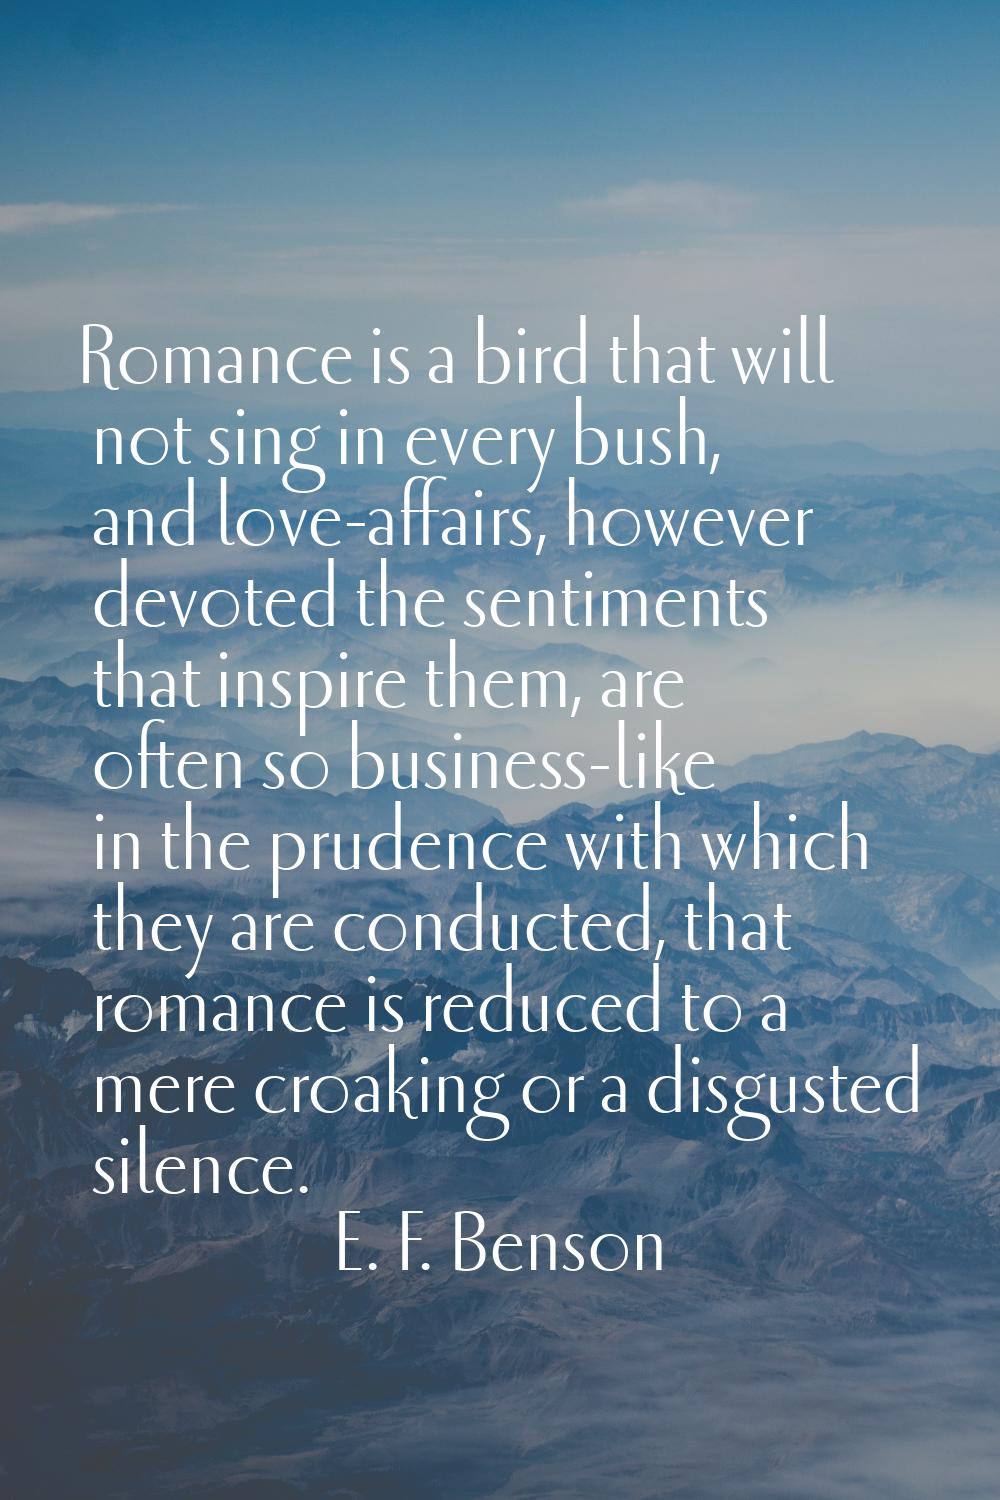 Romance is a bird that will not sing in every bush, and love-affairs, however devoted the sentiment